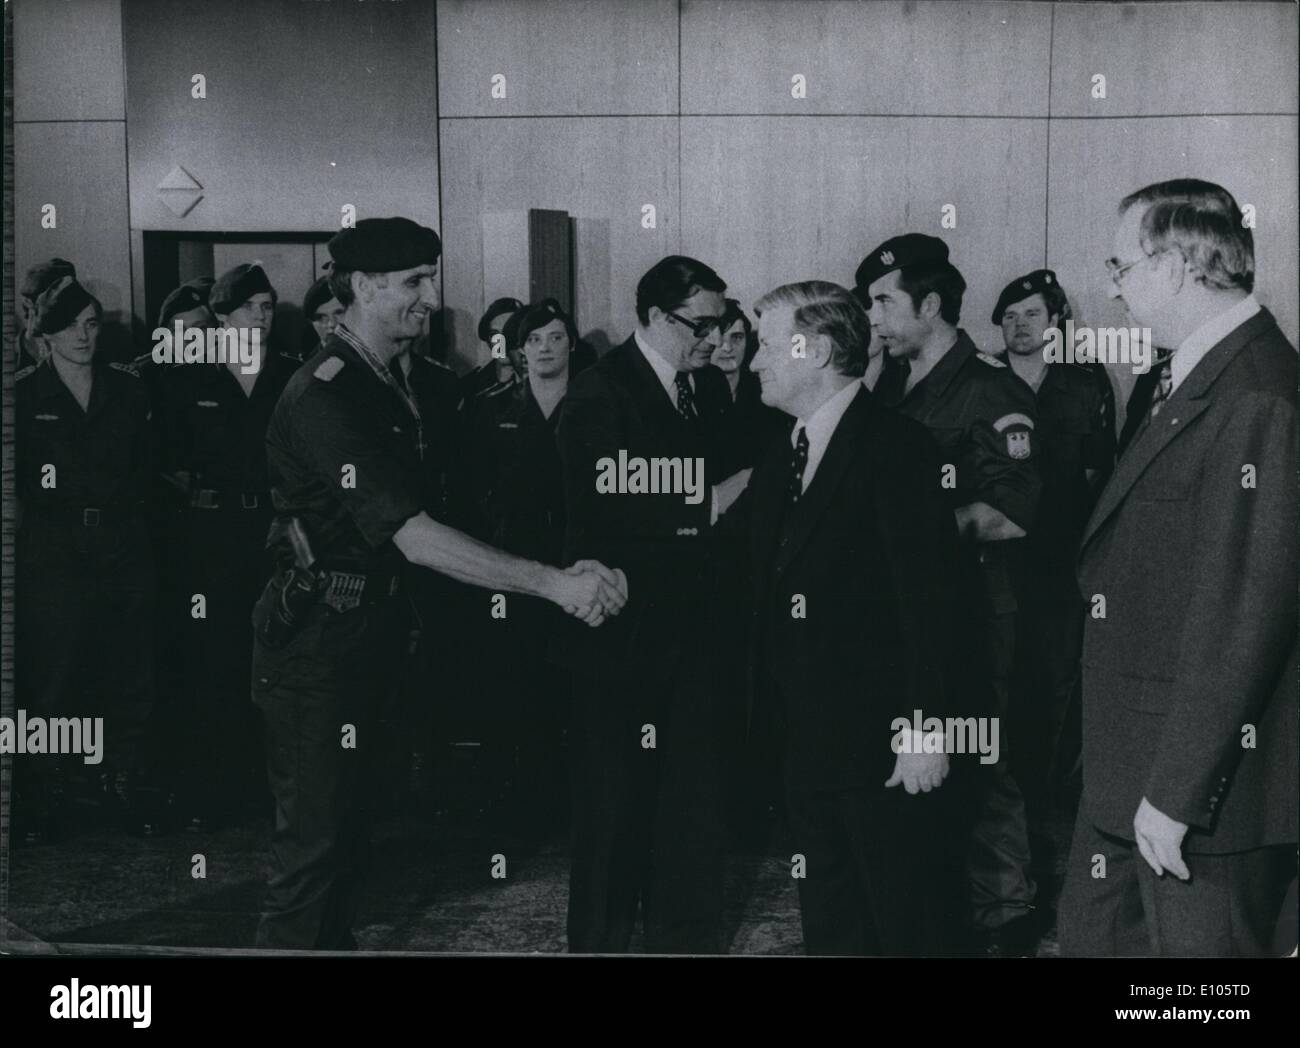 Jan. 1, 1970 - Federal Chancellor Helmut Schmidt (r) congratulates the commander of the GSG-9. Honored with the Federal Distinguished Service Cross in Bonn (FRG) had been 66 women and men. It were crew of the Lufthansa jet Boeing 737, which had been kidnapped by terrorists on October 13th, 1977, and the men of the GSG-9. They had assaulted the jet at the airport of Mogadischu/Somalia on October 18th and rescued the 86 hostages. Photo shows Federal Chancellor Helmut Schmidt (r.) congratulates the commander of the GSG-9 Ulrich Wegener (l.) Stock Photo